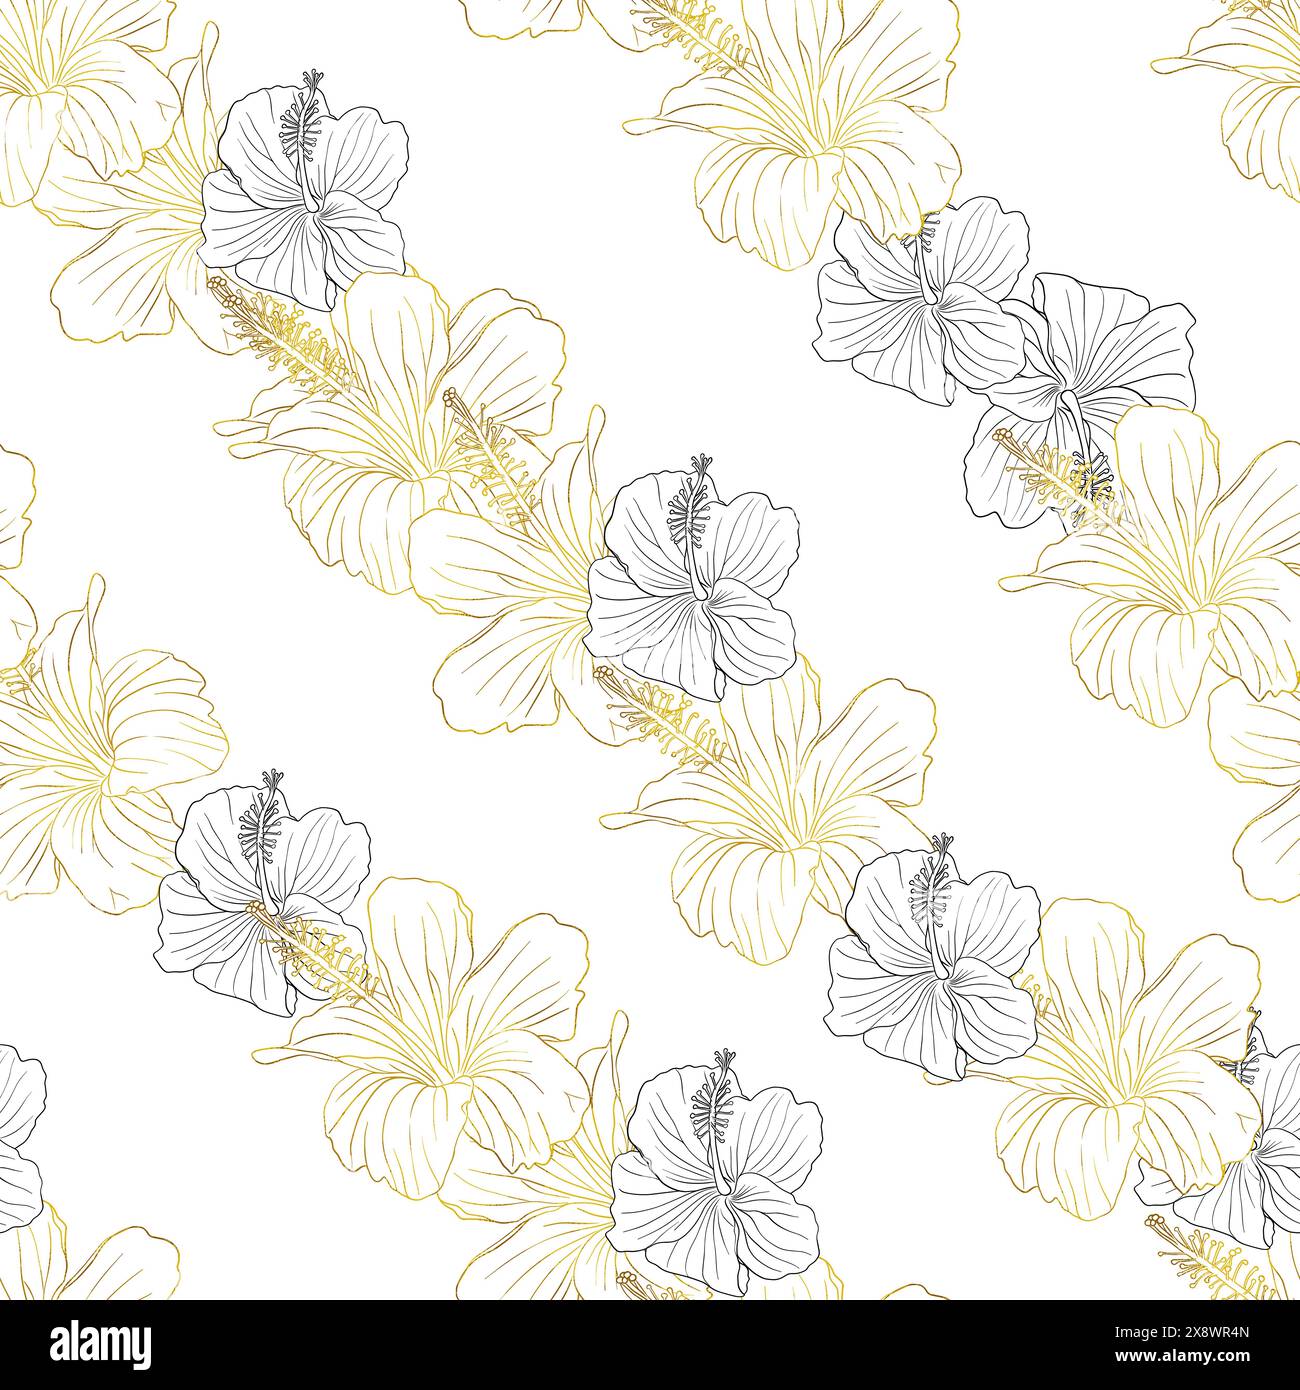 Hibiscus flower seamless pattern for textile design, scrapbook, wallpaper. Line art black and golden striped hand drawn tropical floral background Stock Vector